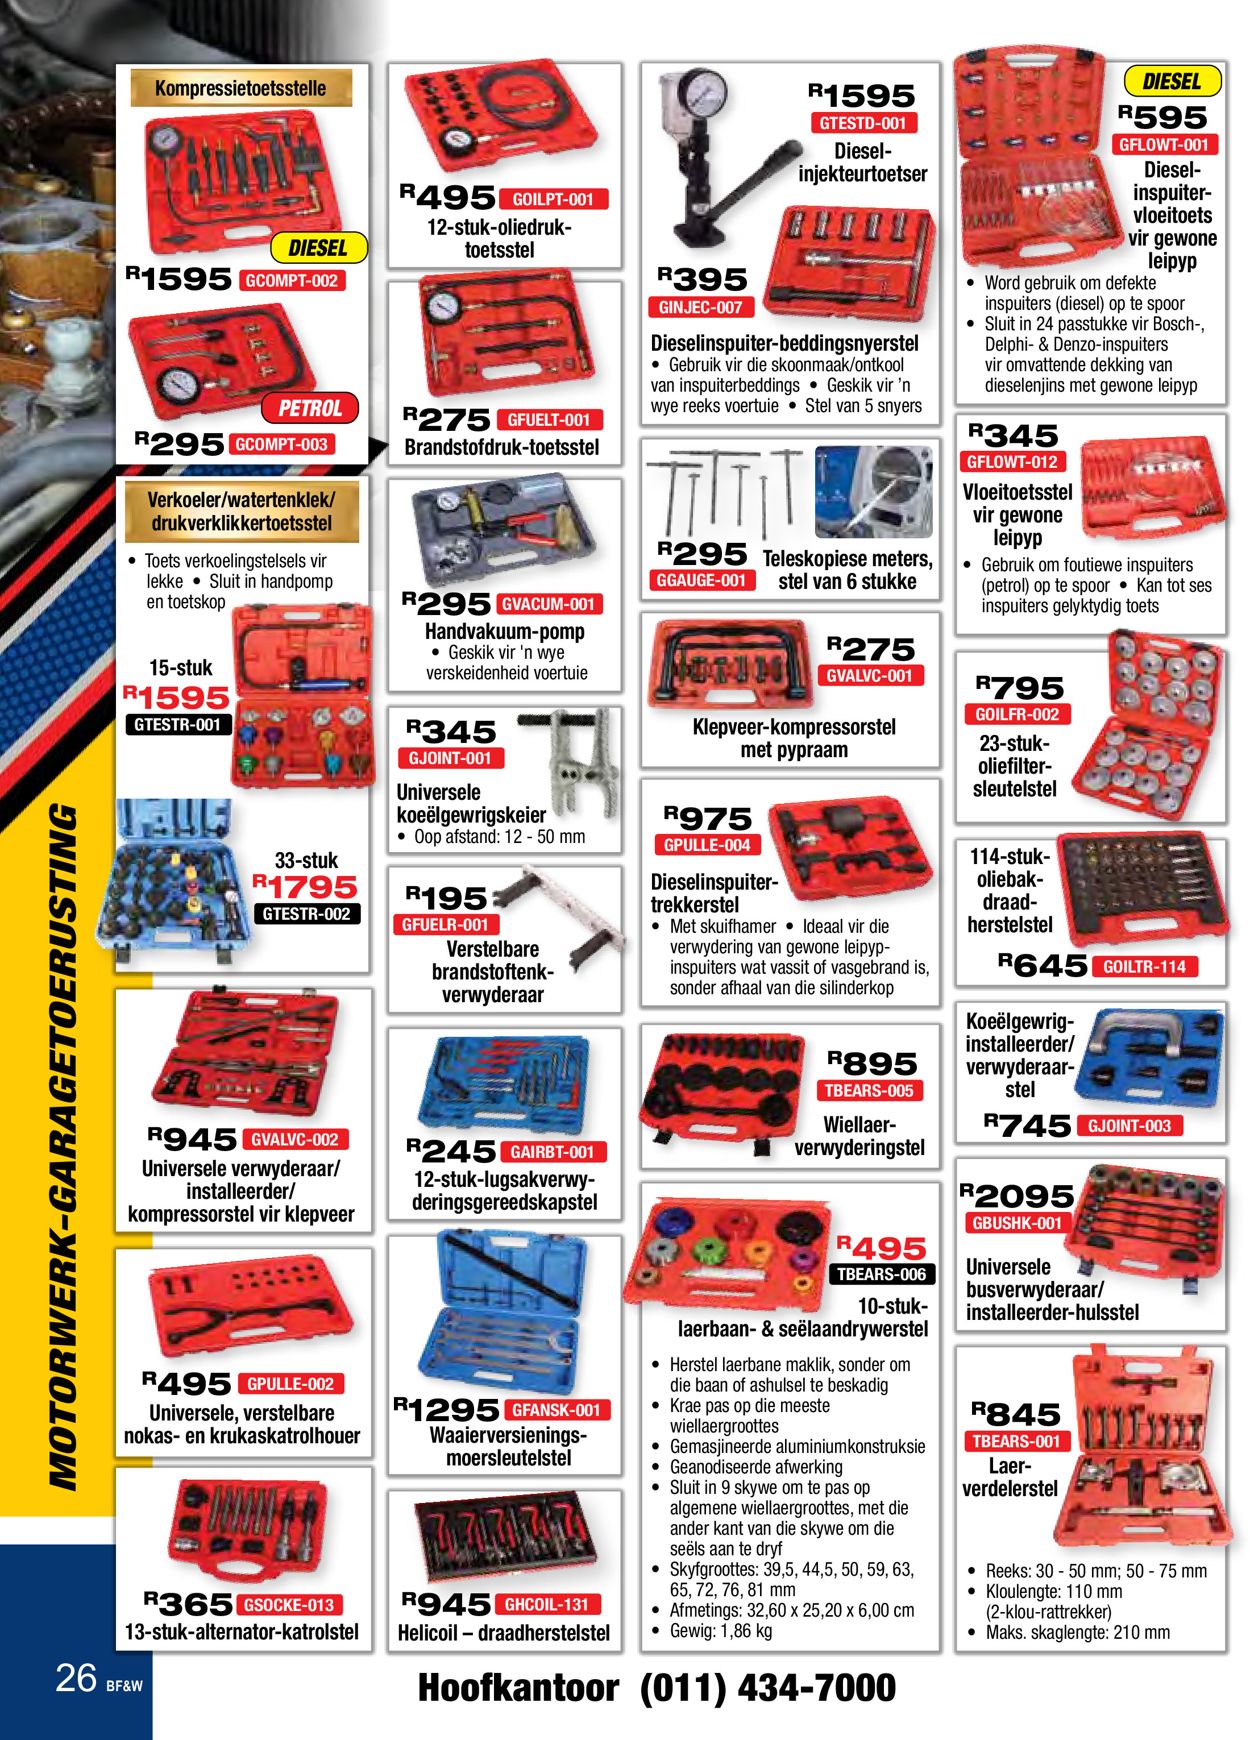 Adendorff Machinery Mart Catalogue from 2021/07/06